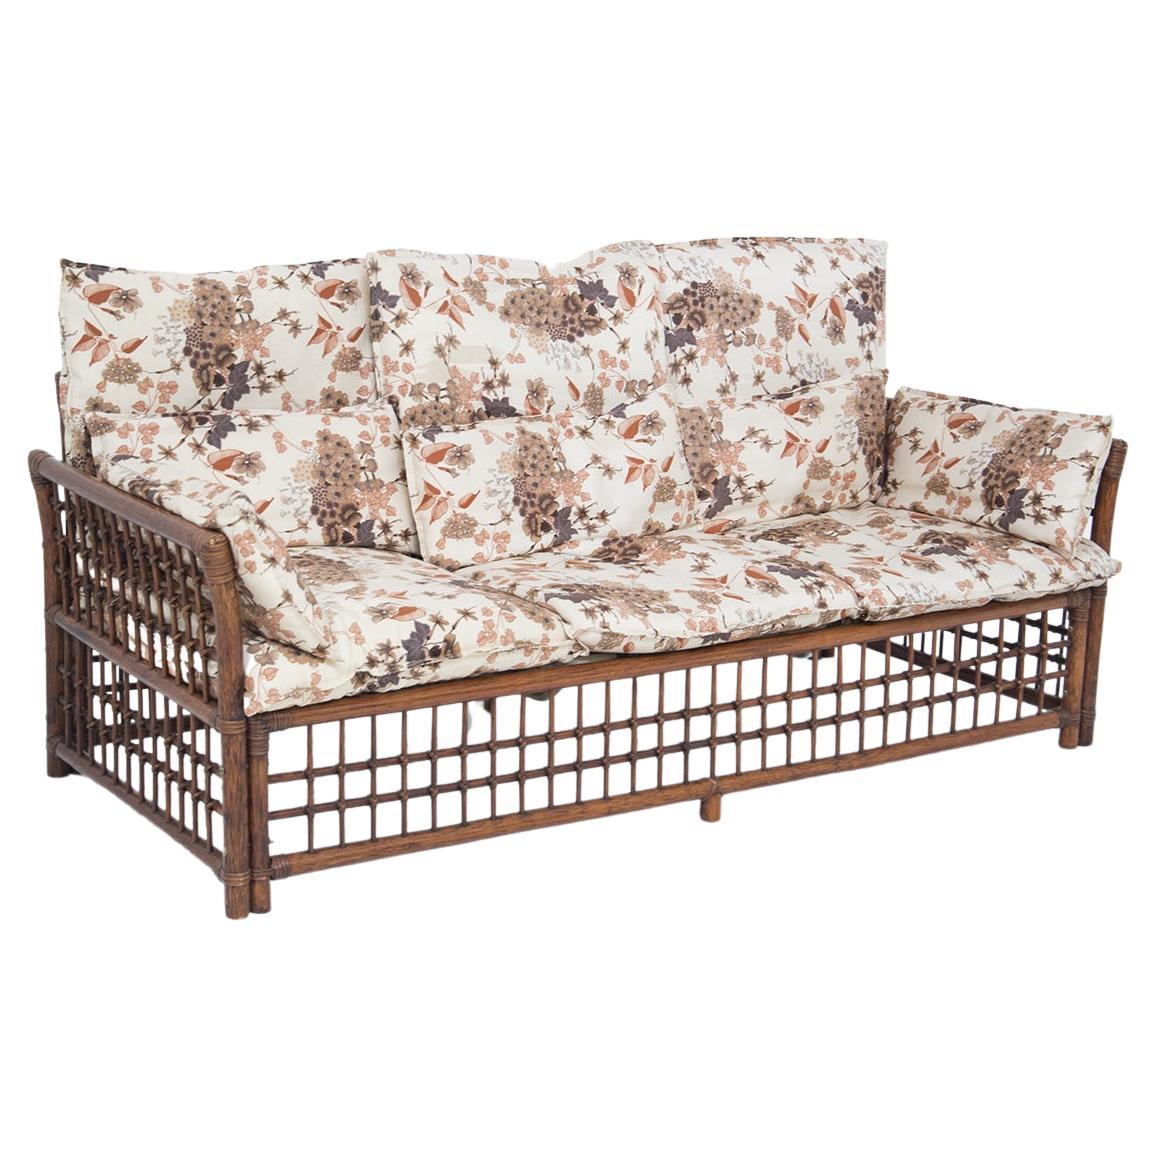 Vivai del Sud Vintage Wood and Rattan Sofa W Floral Fabric